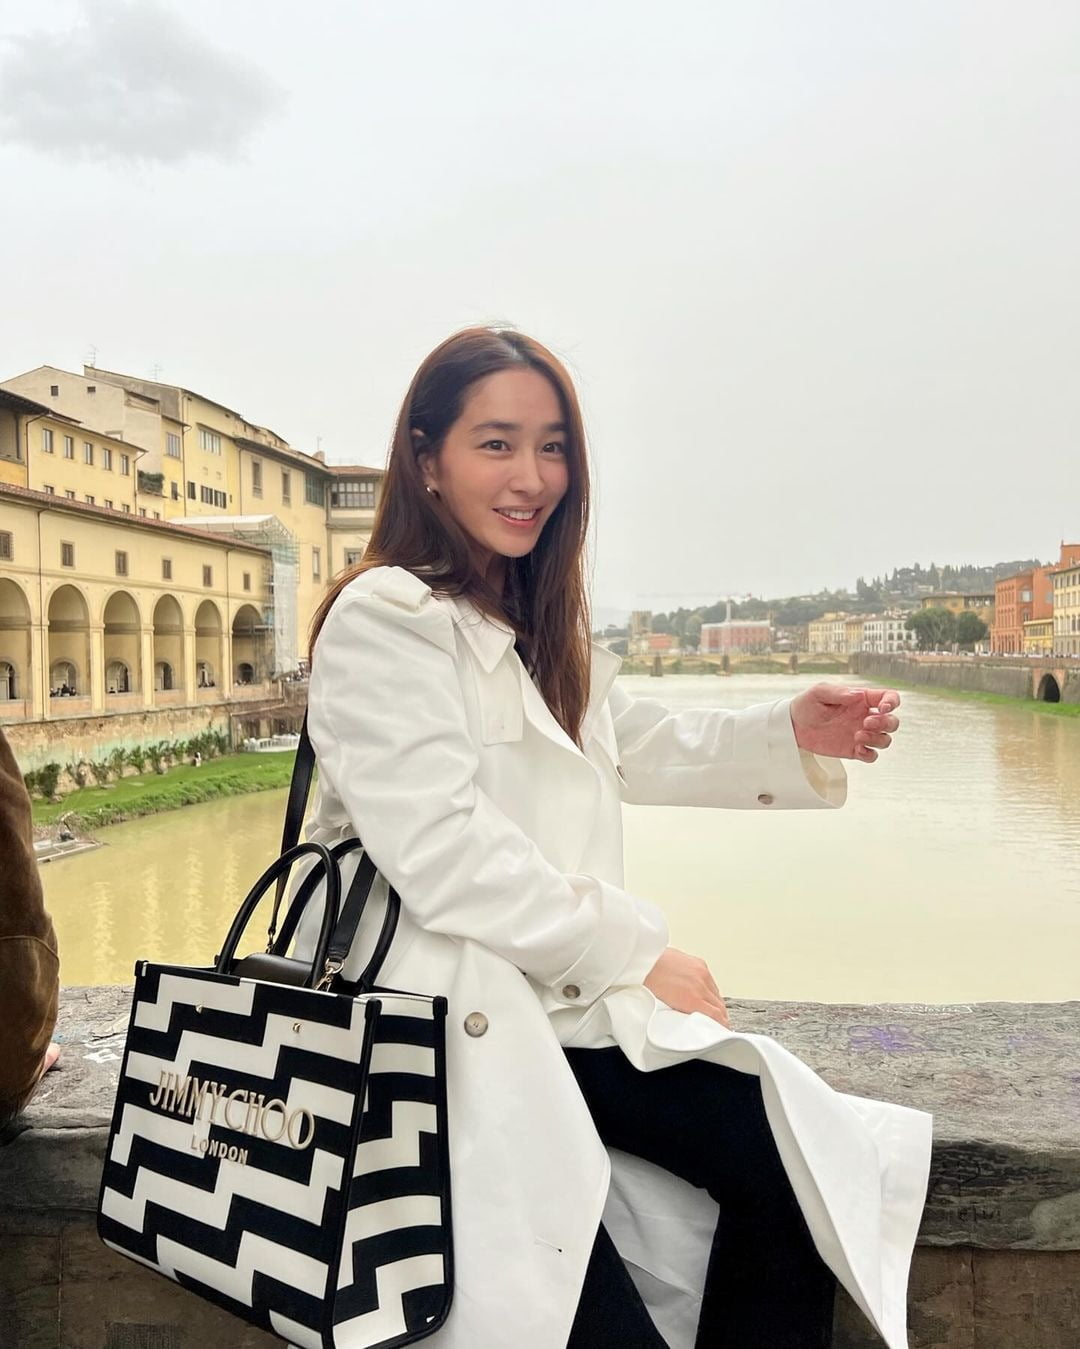 Lee Min-jung, did she go on a trip to Italy with her husband Lee Byung-hun? “You look nice for the first time in a long time.”